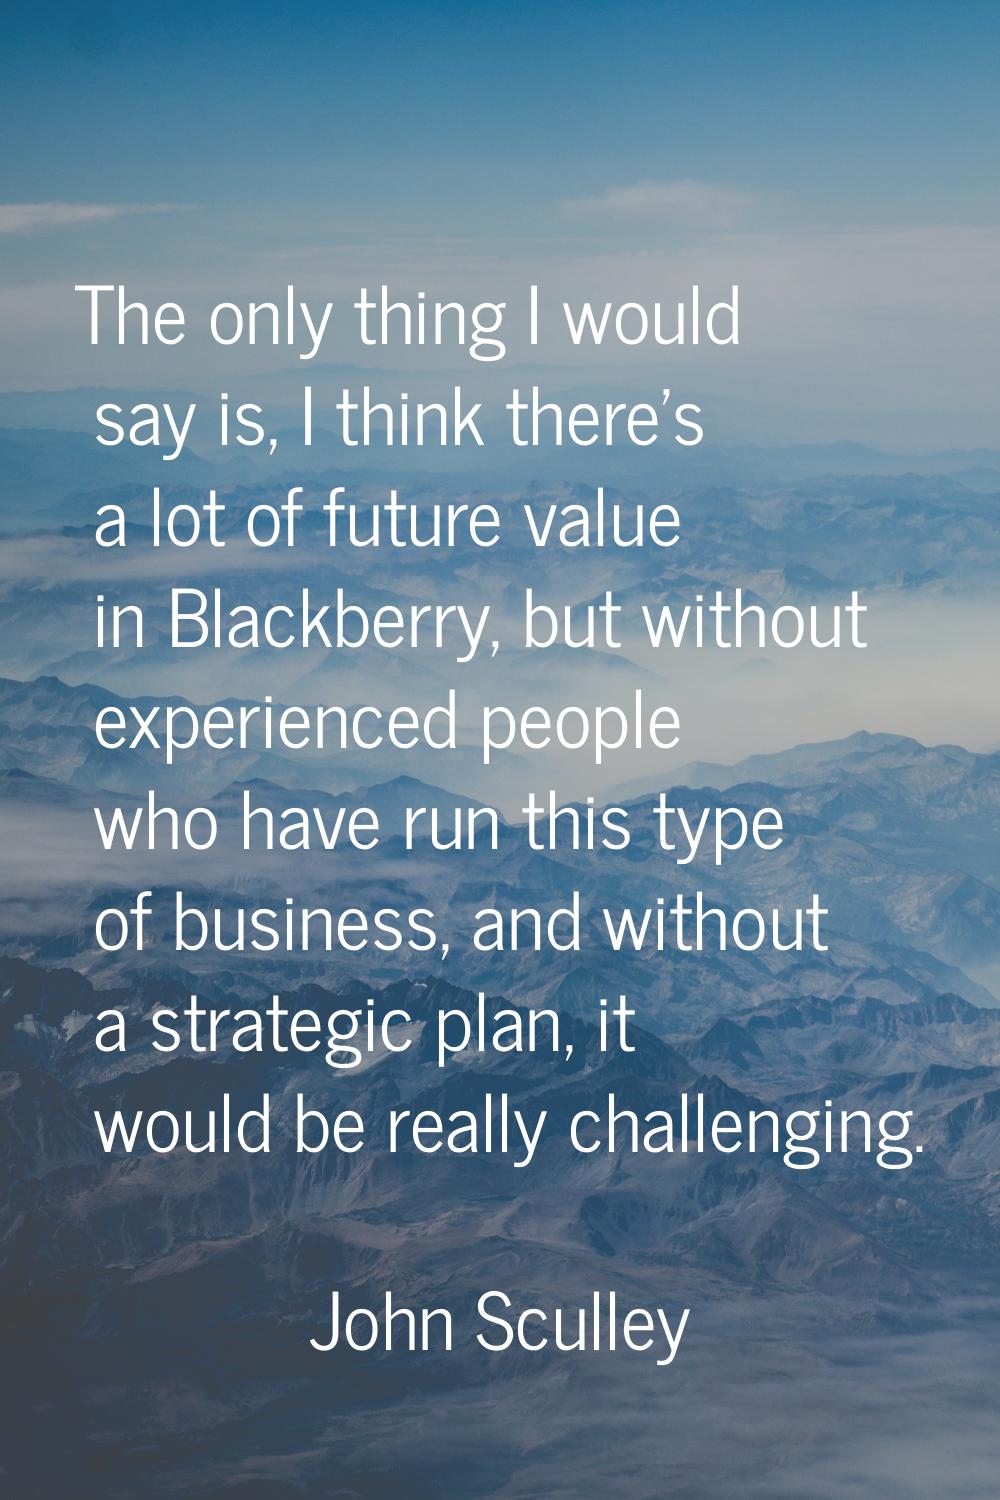 The only thing I would say is, I think there's a lot of future value in Blackberry, but without exp